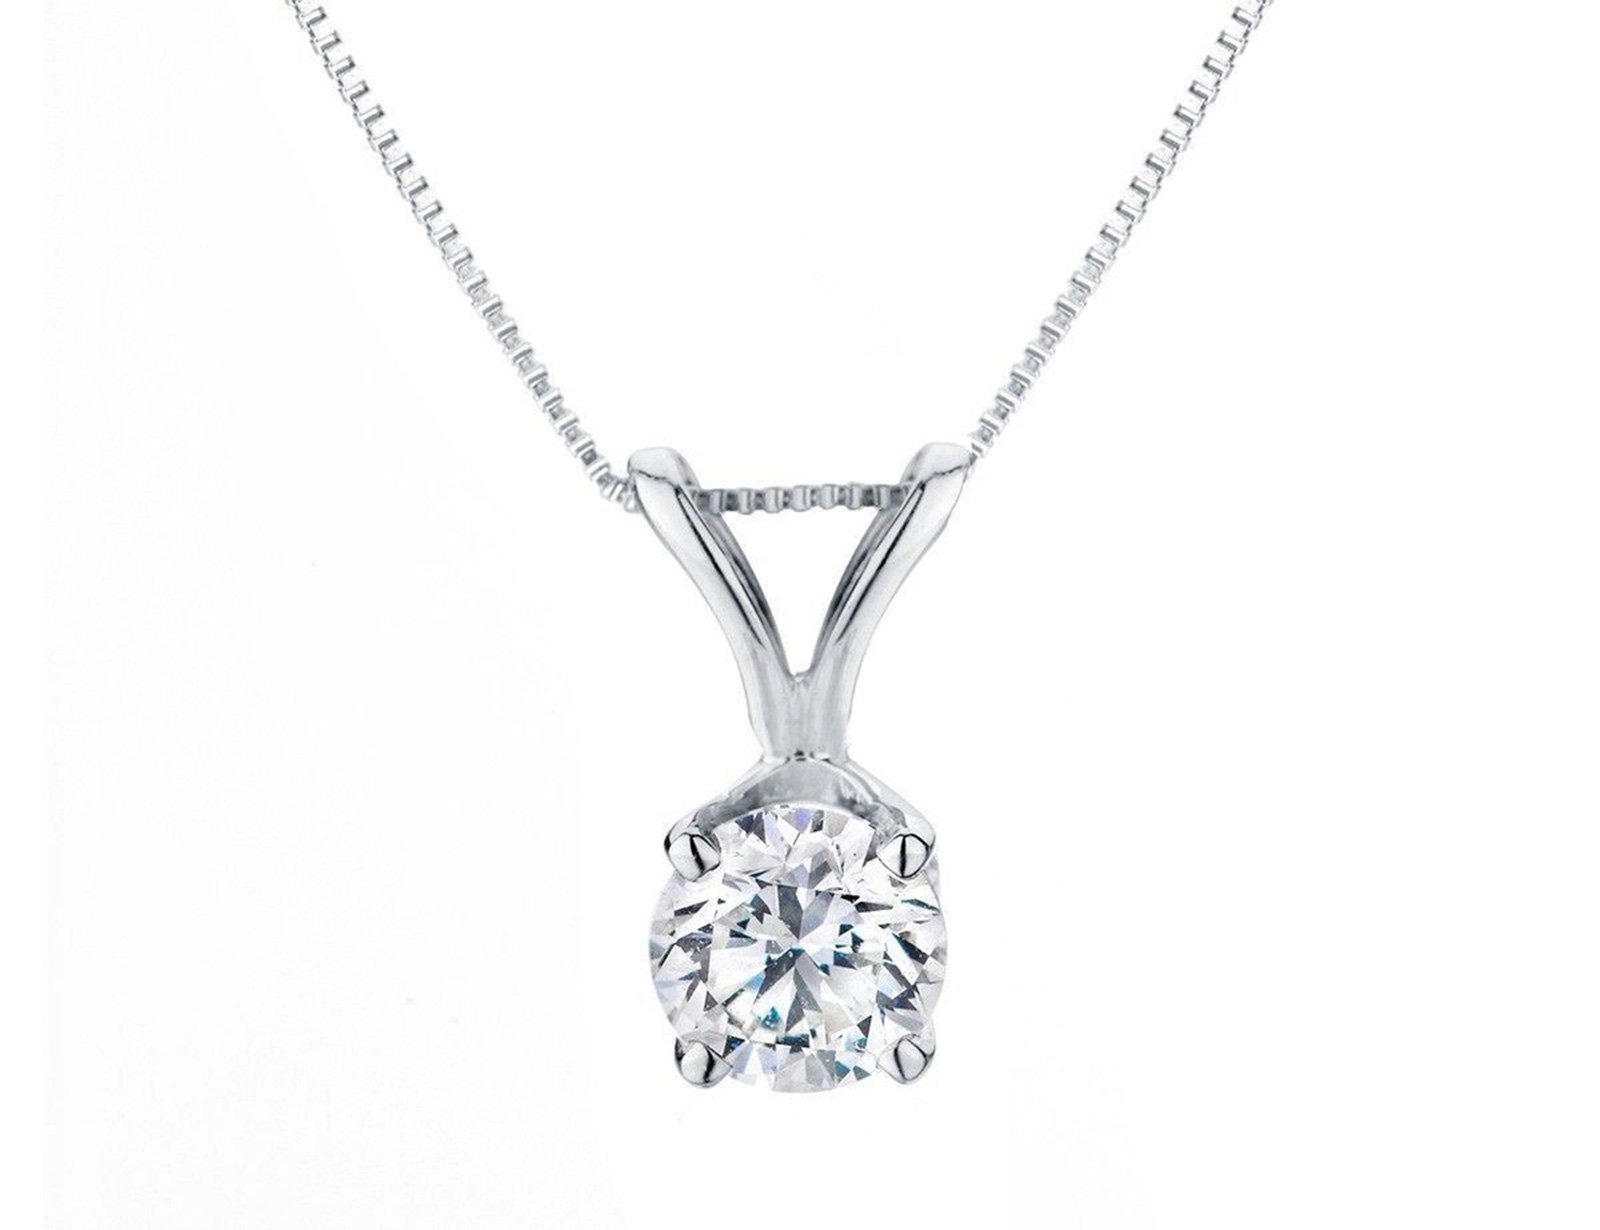 3.0 ct Brilliant Round Cut Stunning Genuine Moissanite Ideal VVS1 D Solitaire Pendant Necklace With 18